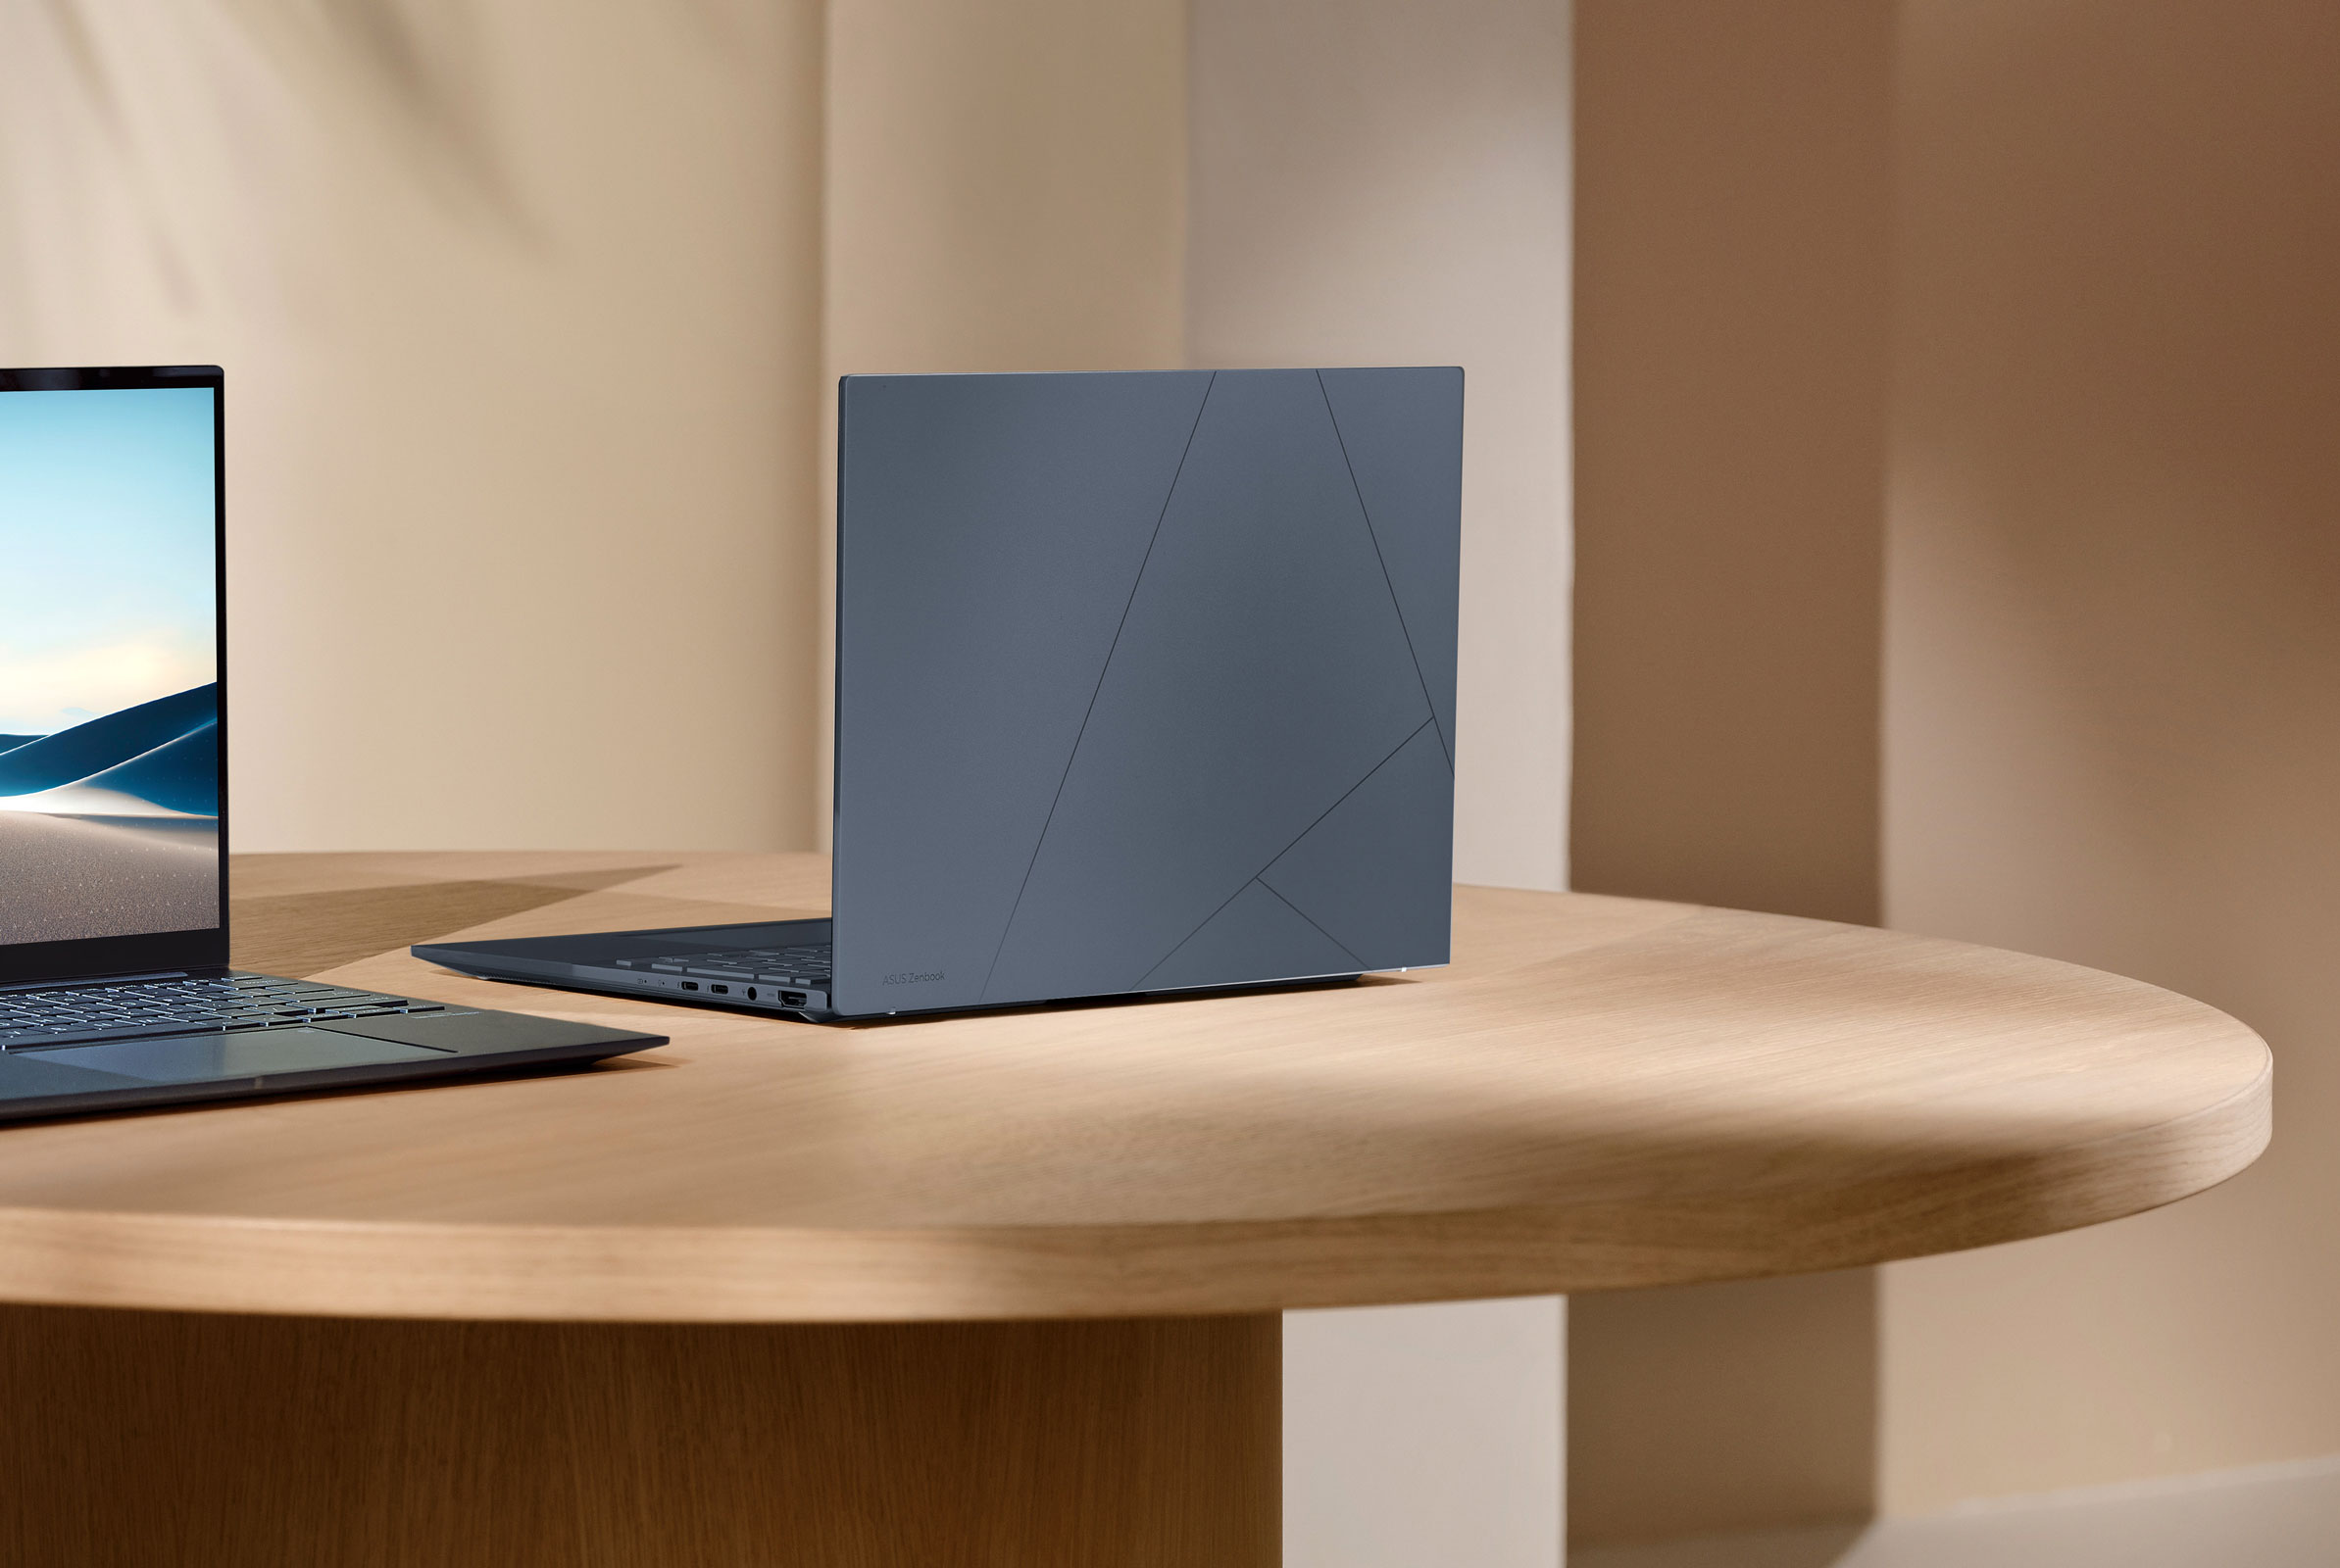 Two ASUS Zenbook 14 OLED laptops on a wooden table